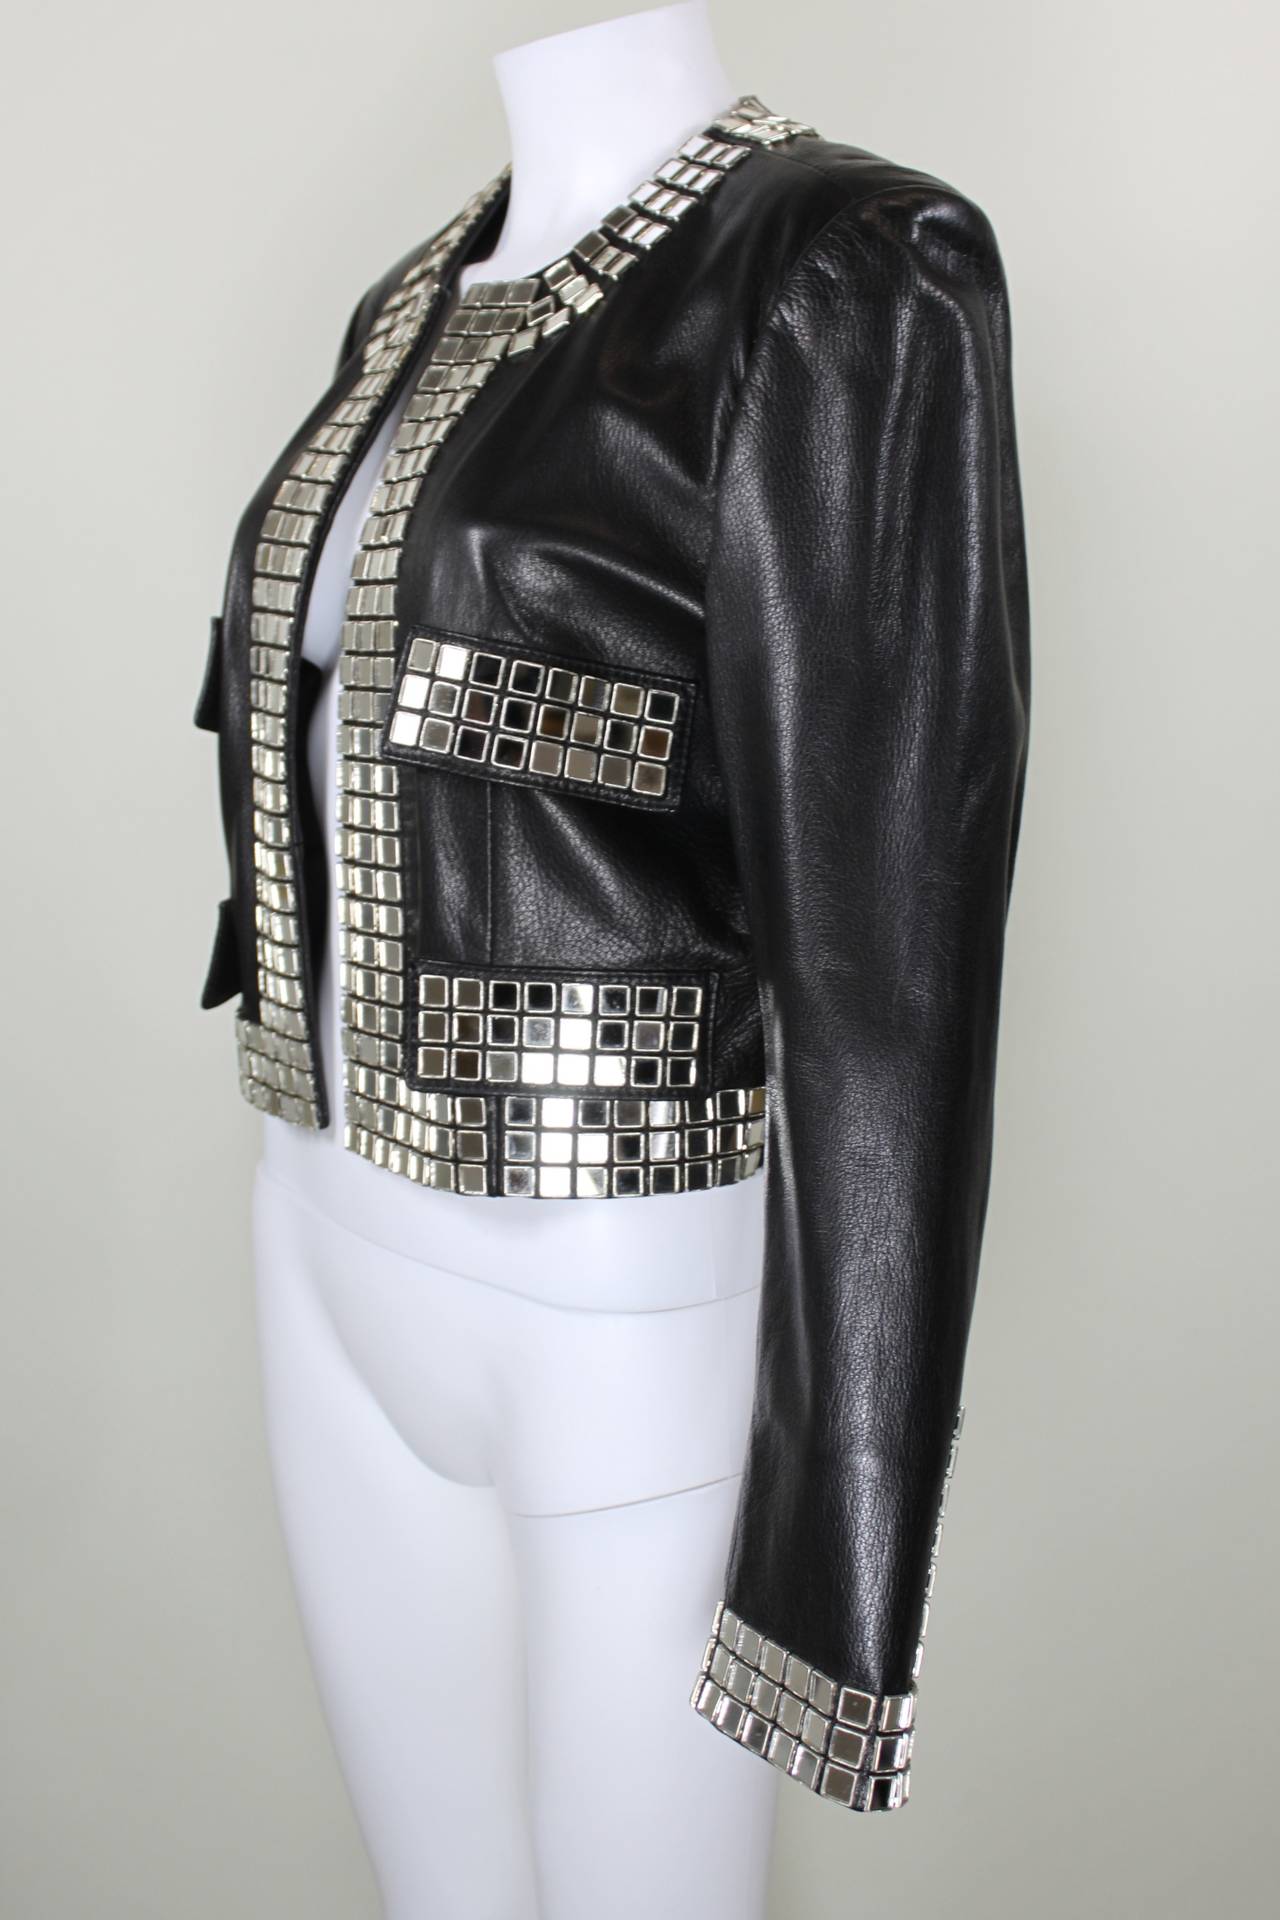 MOSCHINO Leather Moto Jacket with Disco Mirror Appliqués In Excellent Condition In Los Angeles, CA